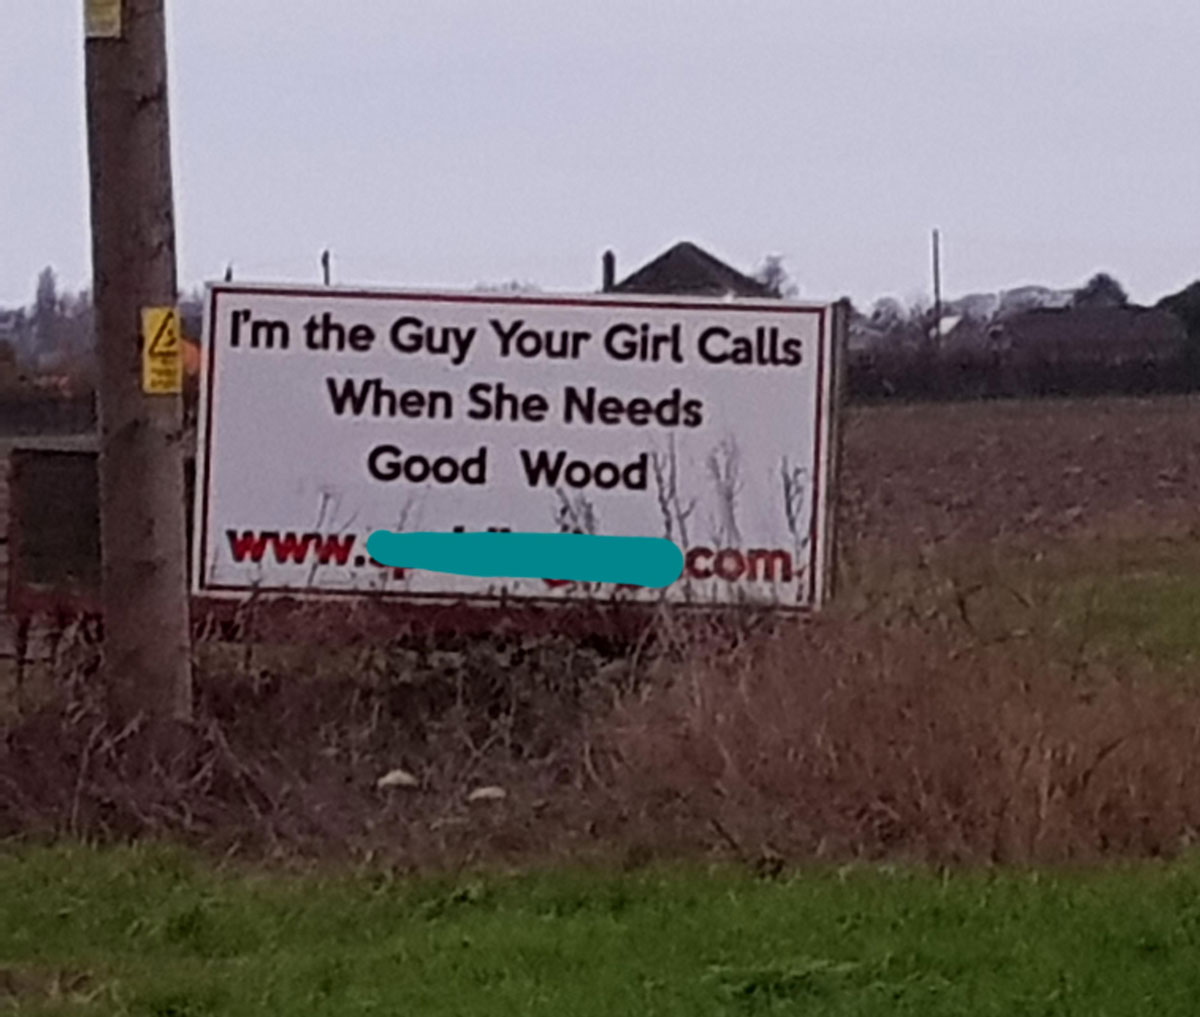 Advert for a timber company we drove past a few years ago